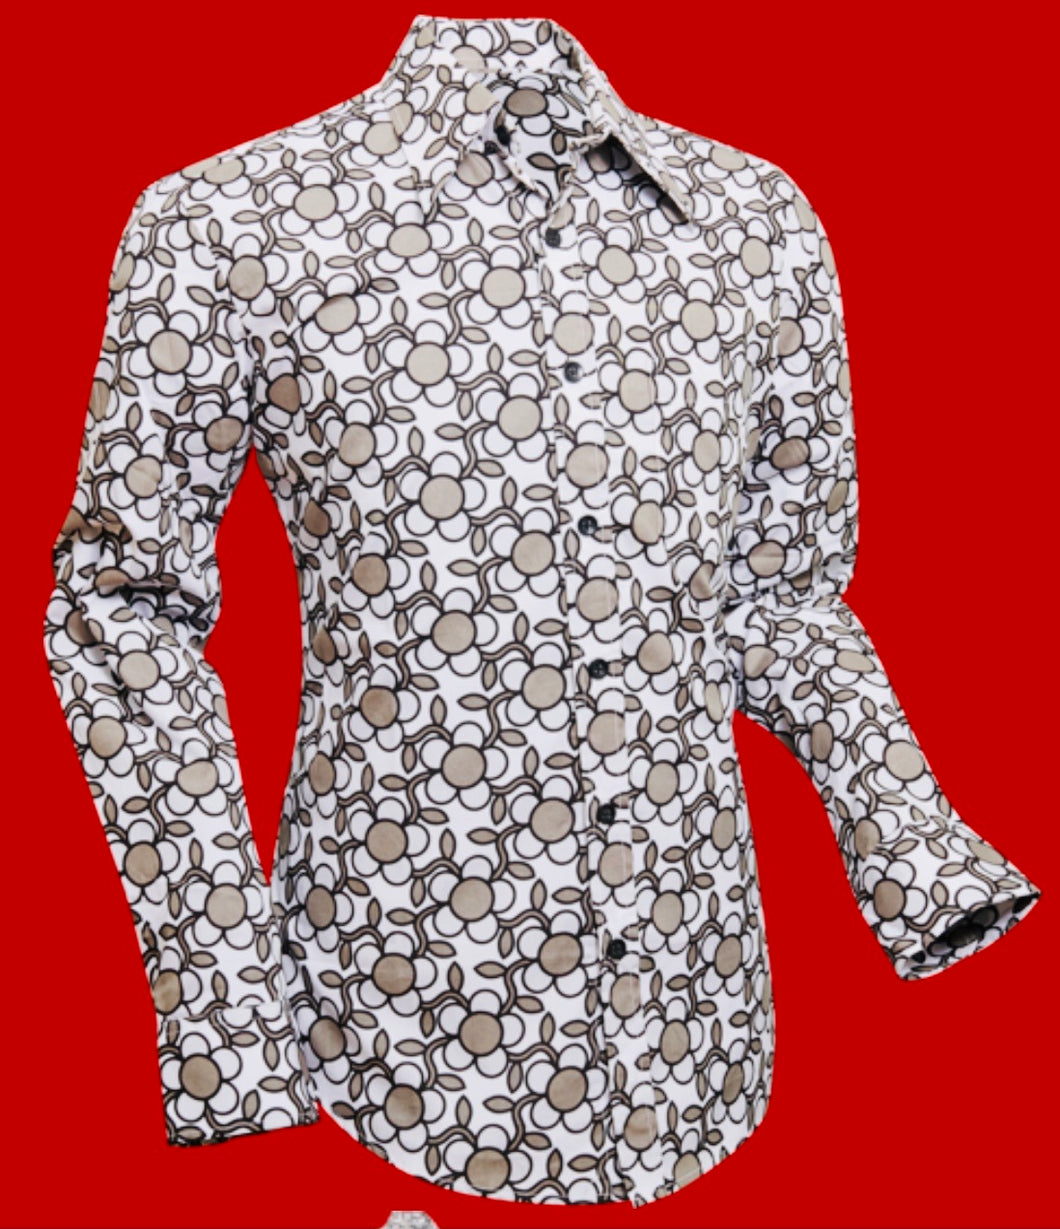 Flowergrid design long sleeved Retro 70s style shirt in Grey